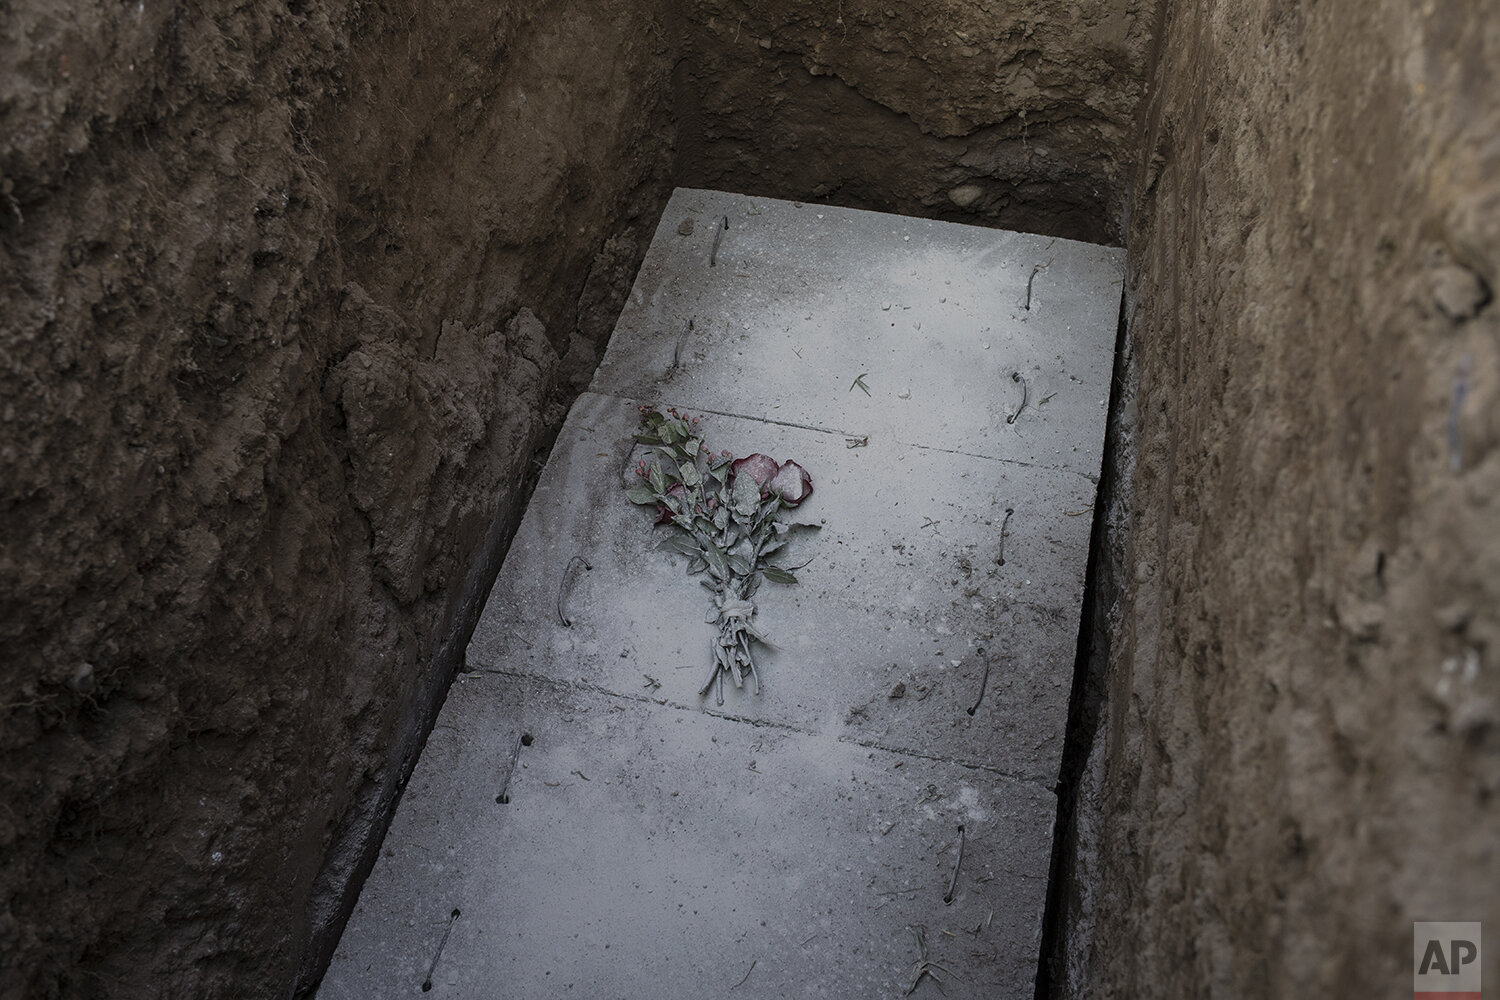  In this May 8, 2020 photo, flowers covered with cement and lime pose on the grave of TV camera man Mario Bucana, who died due to COVID-19 in Lima, Peru. (AP Photo/Rodrigo Abd) 